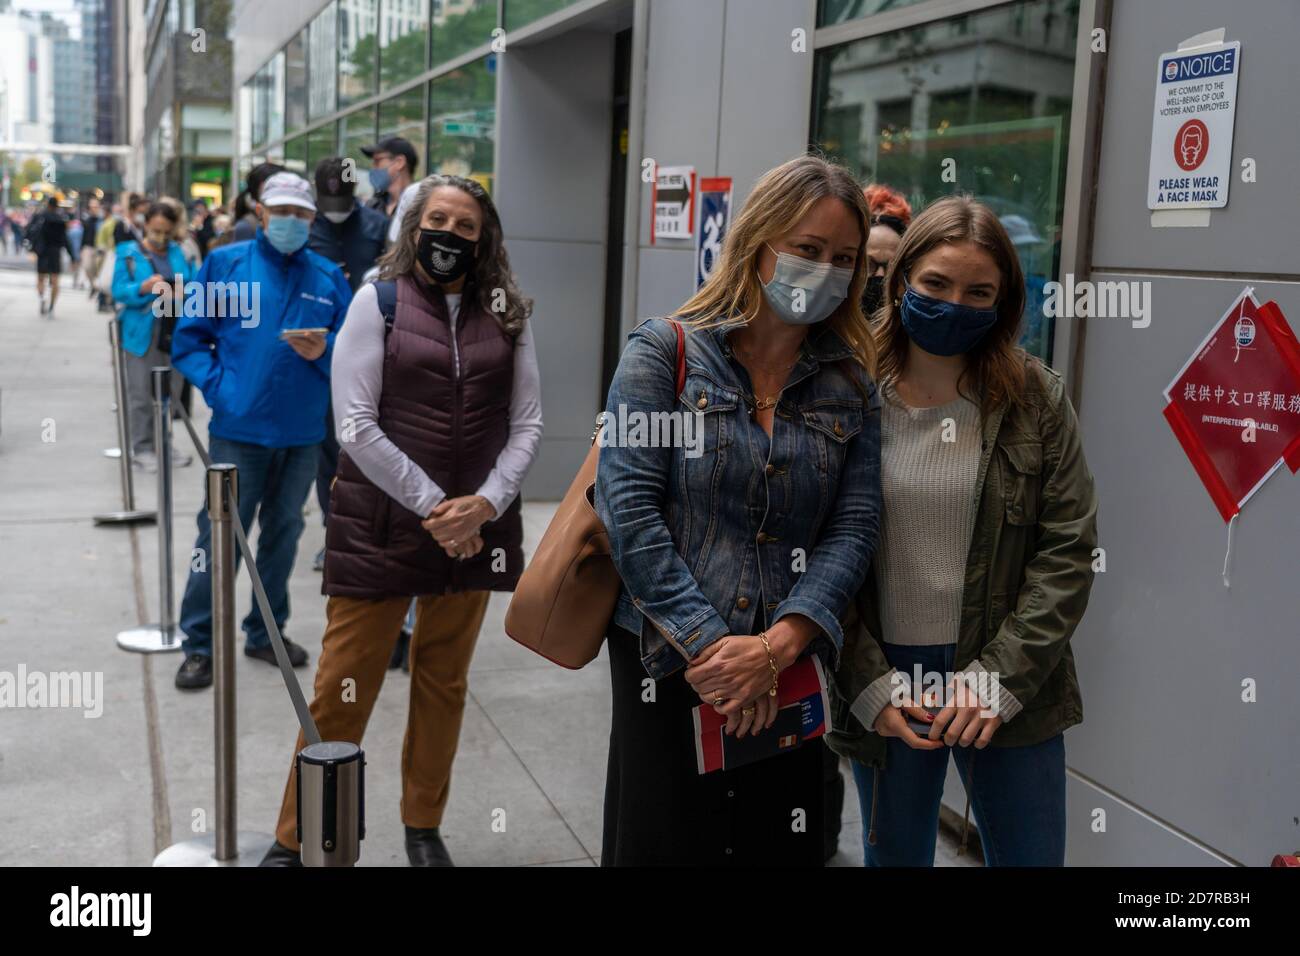 https://c8.alamy.com/comp/2D7RB3H/new-york-united-states-24th-oct-2020-people-stand-in-a-long-line-wrap-around-the-block-to-cast-their-vote-at-the-voting-site-located-at-madison-square-garden-during-the-early-voting-for-the-us-presidential-electiondue-to-the-coronavirus-and-social-distancing-concerns-new-york-state-is-allowing-early-voting-for-the-first-time-credit-sopa-images-limitedalamy-live-news-2D7RB3H.jpg